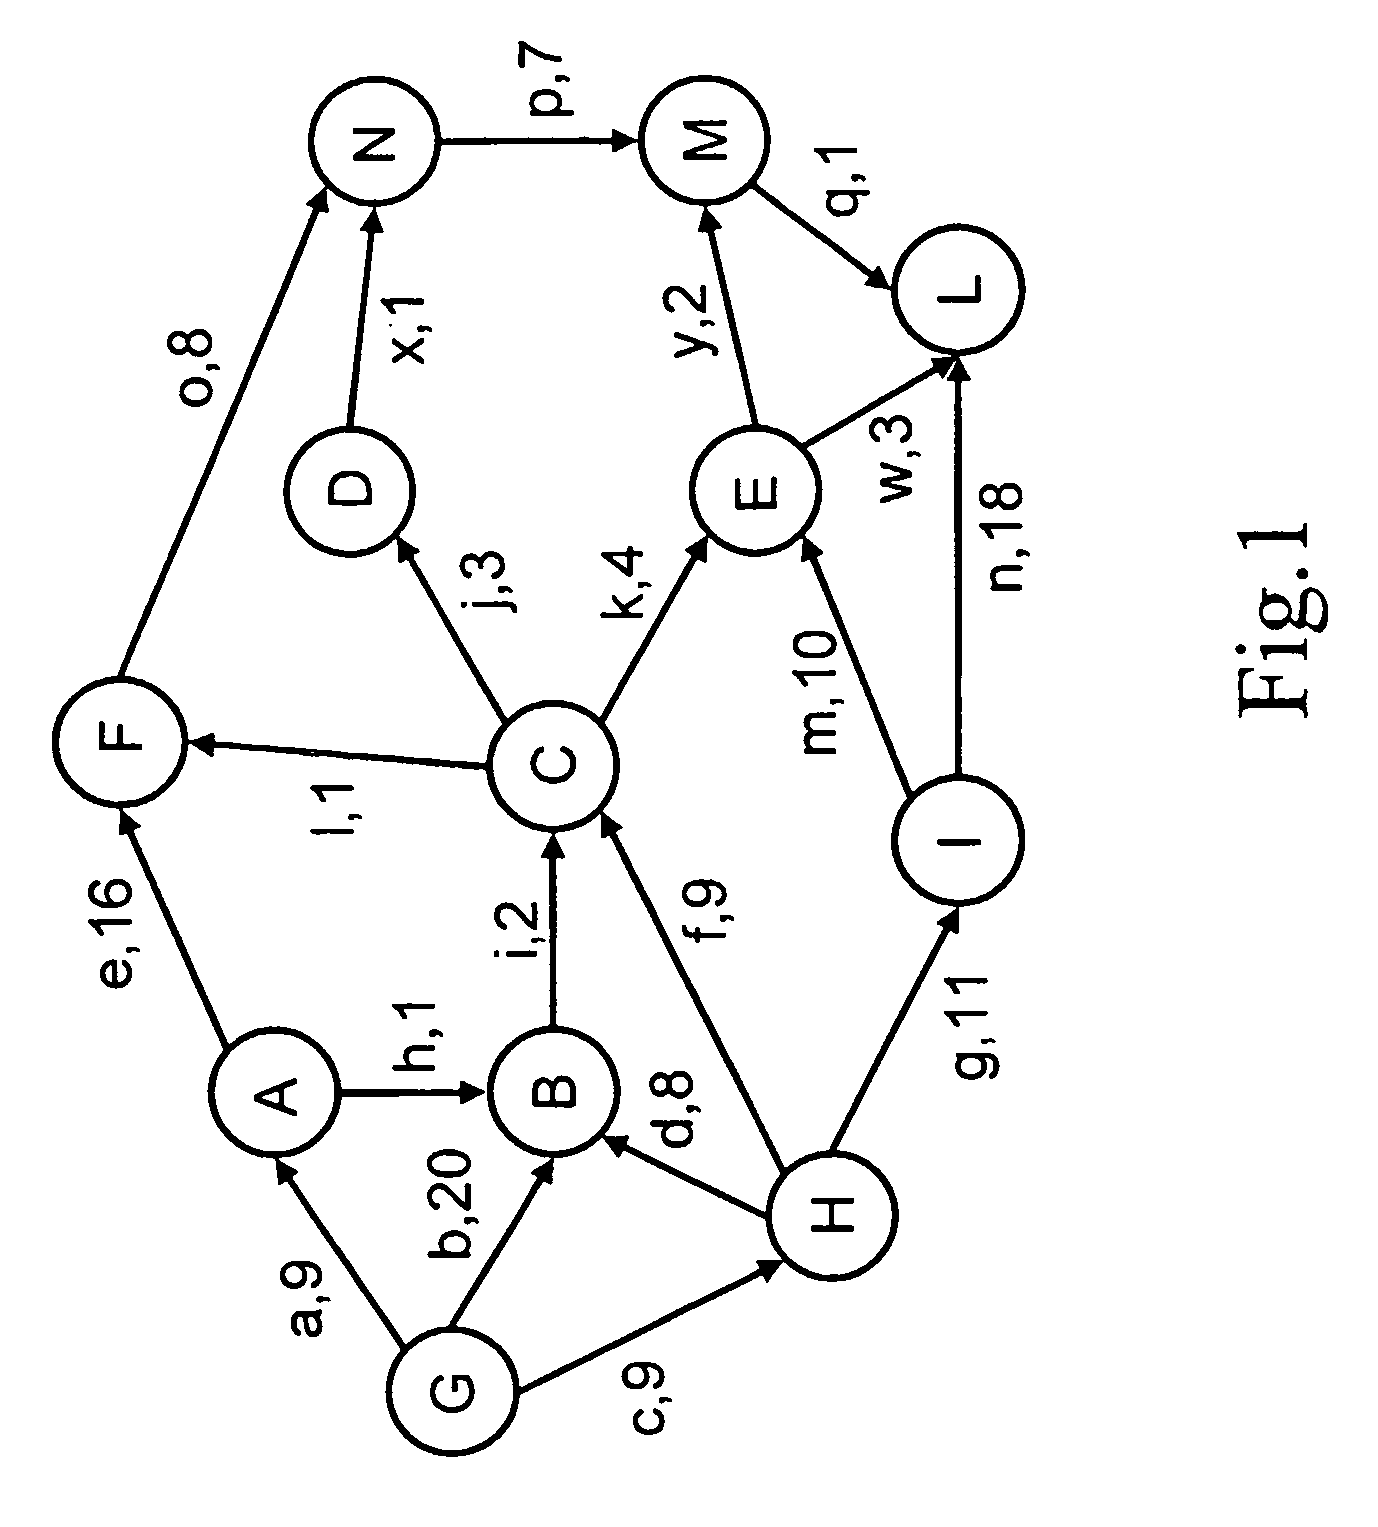 Method for Configuring an Optical Network